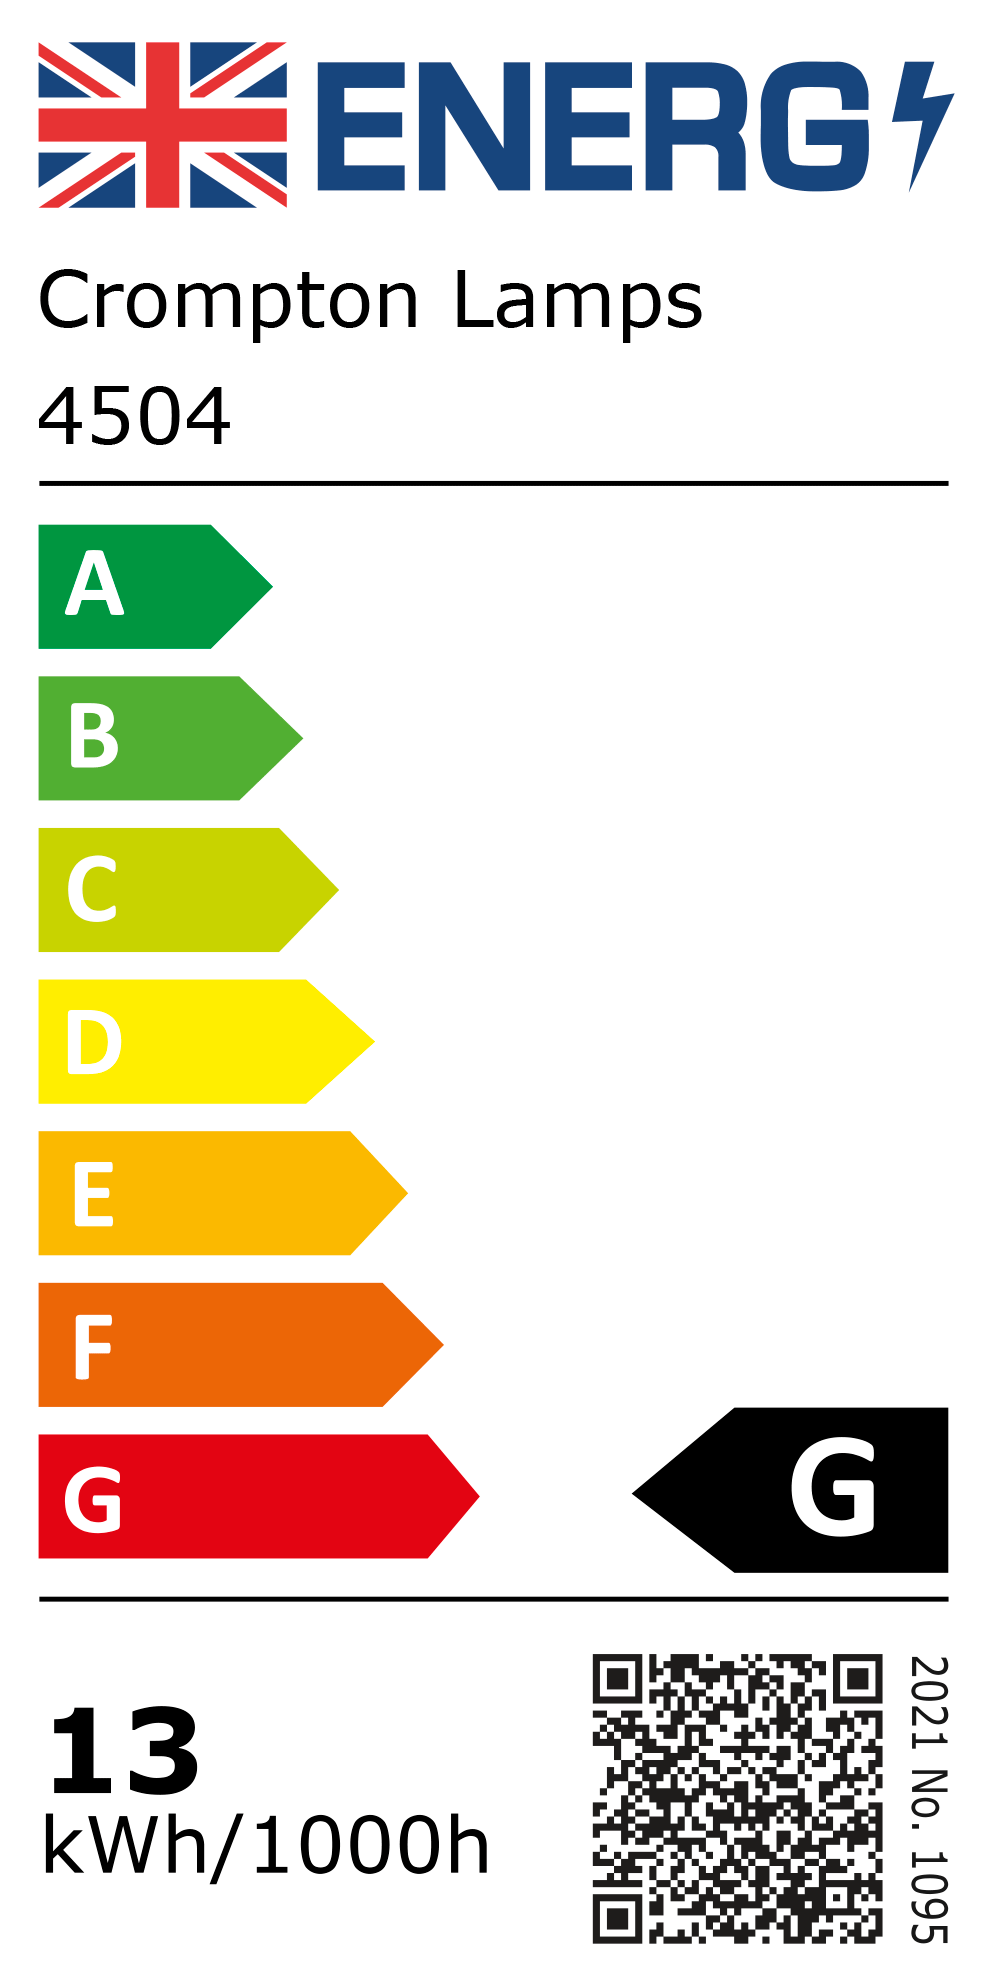 New 2021 Energy Rating Label: Stock Code 4504